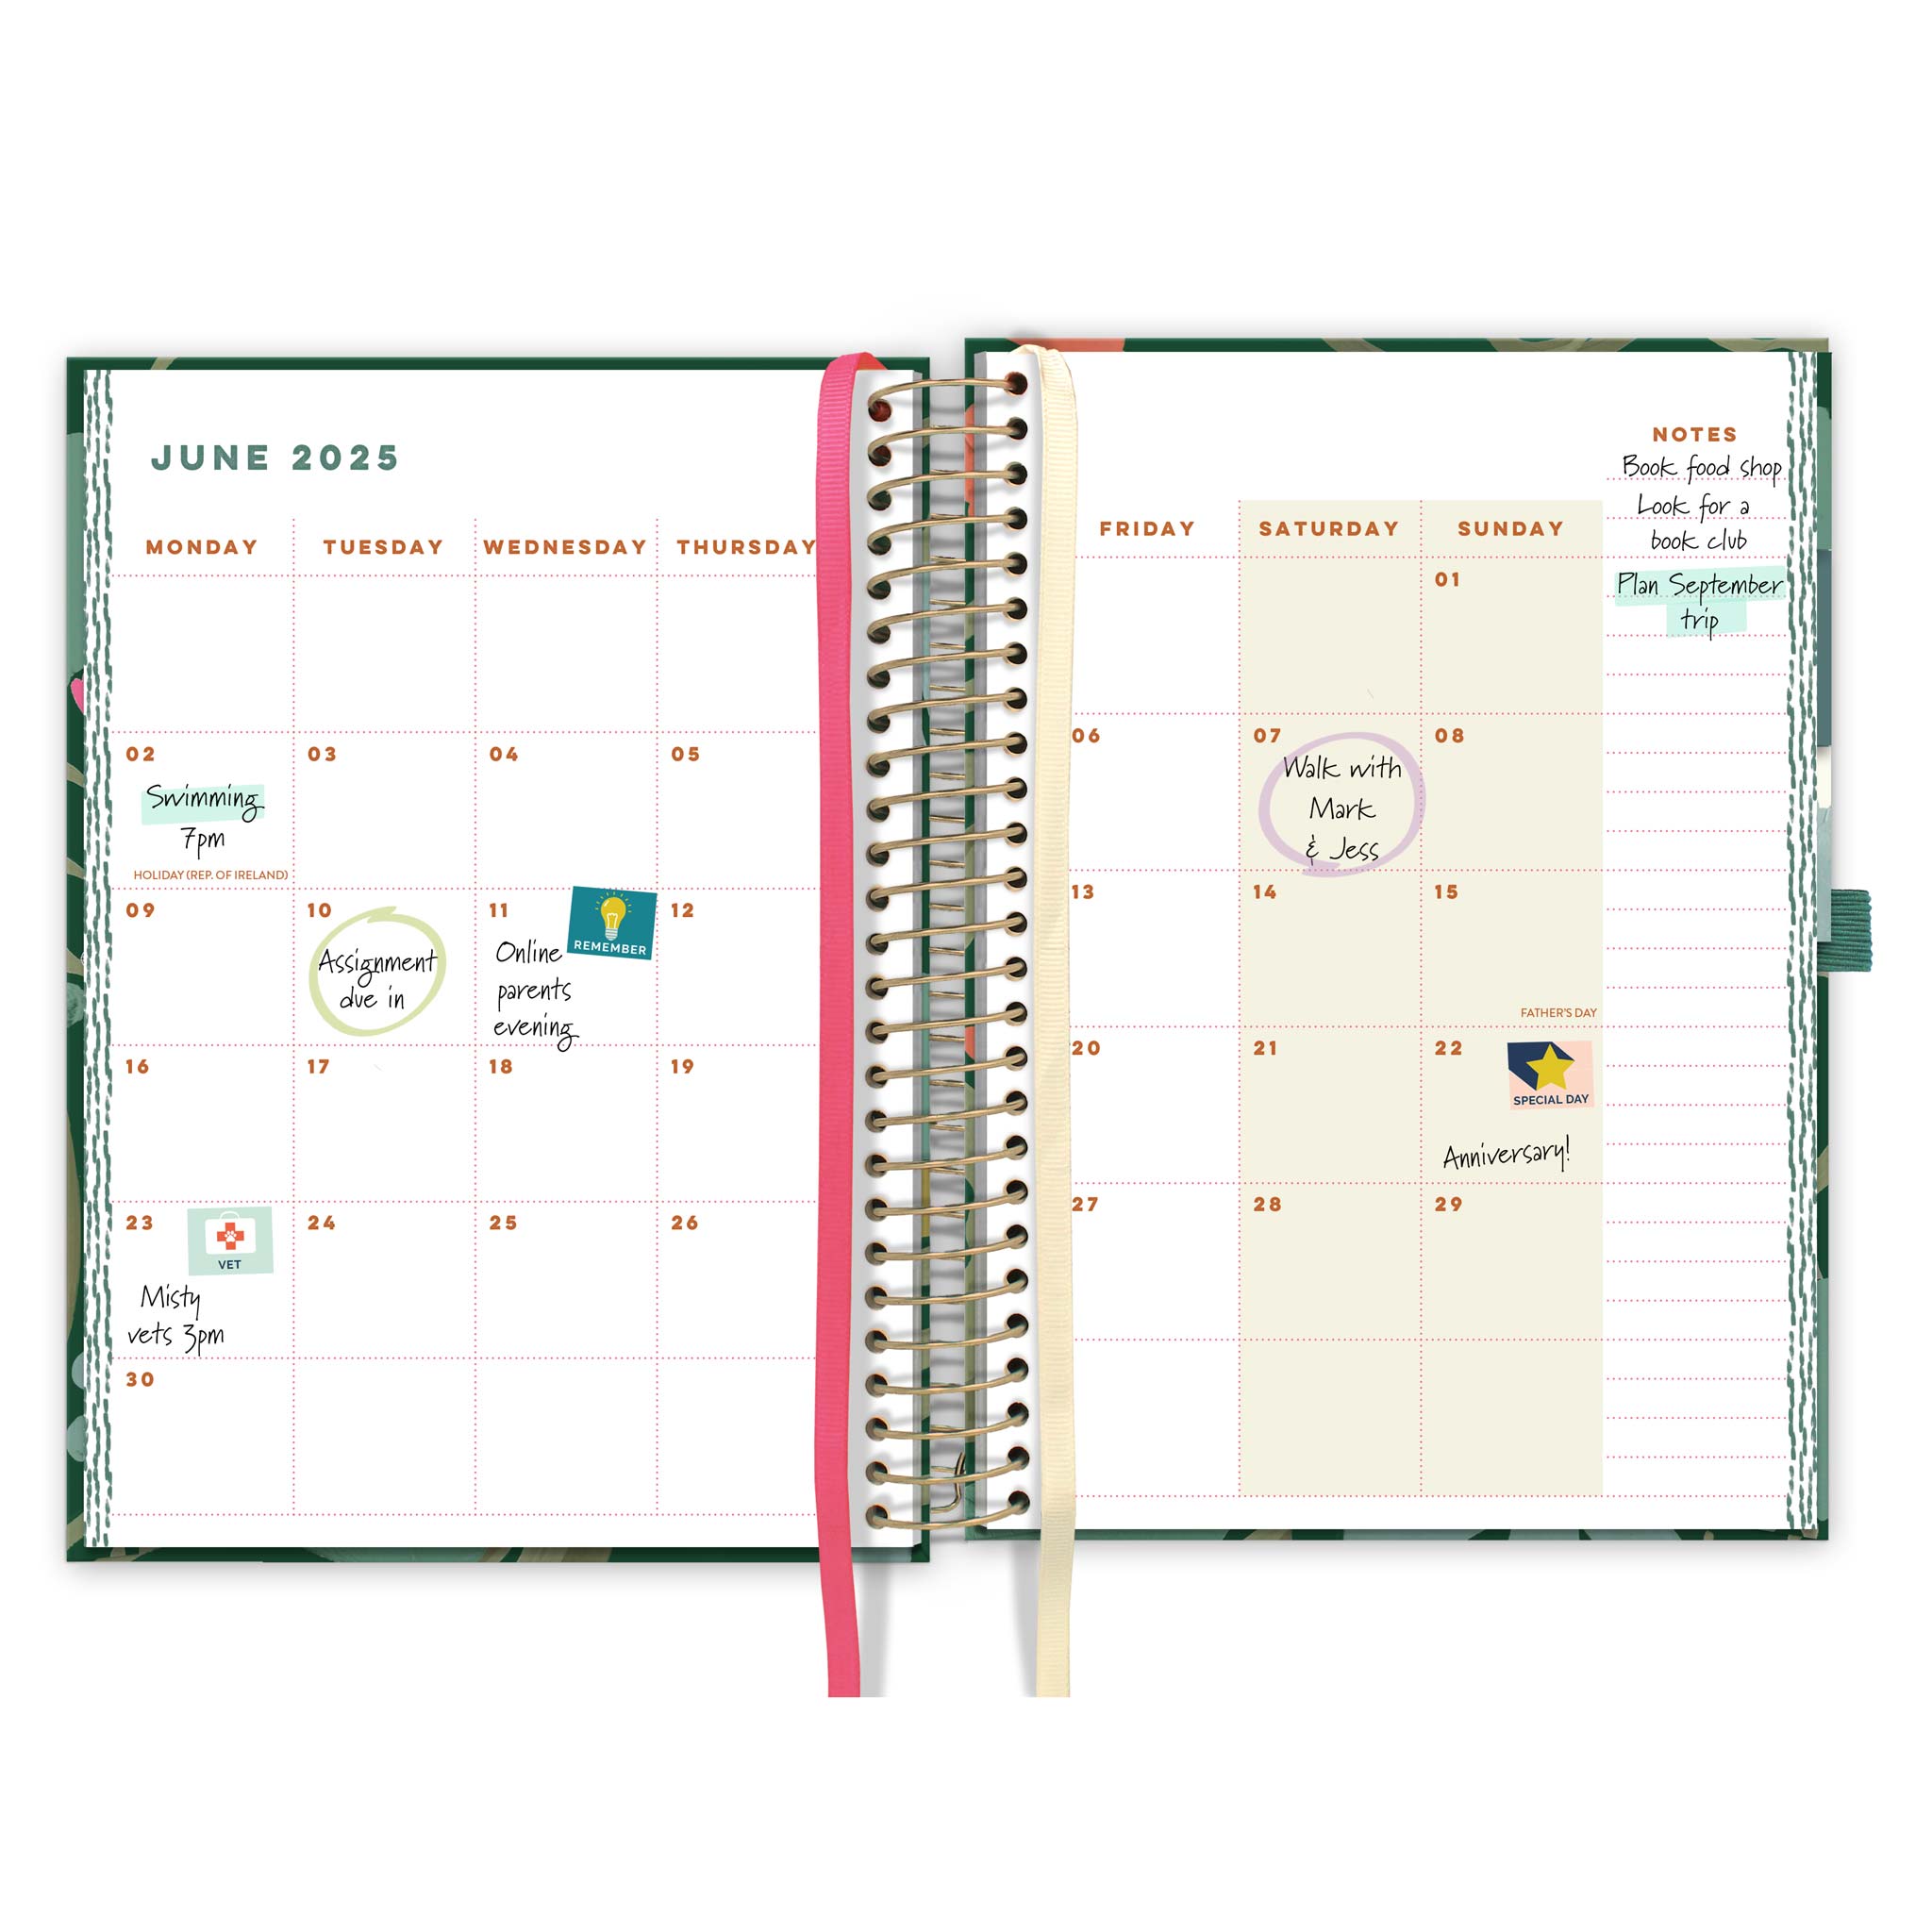 An open page diary spread with a month to view calendar with appointments and stickers and white and pink page markers